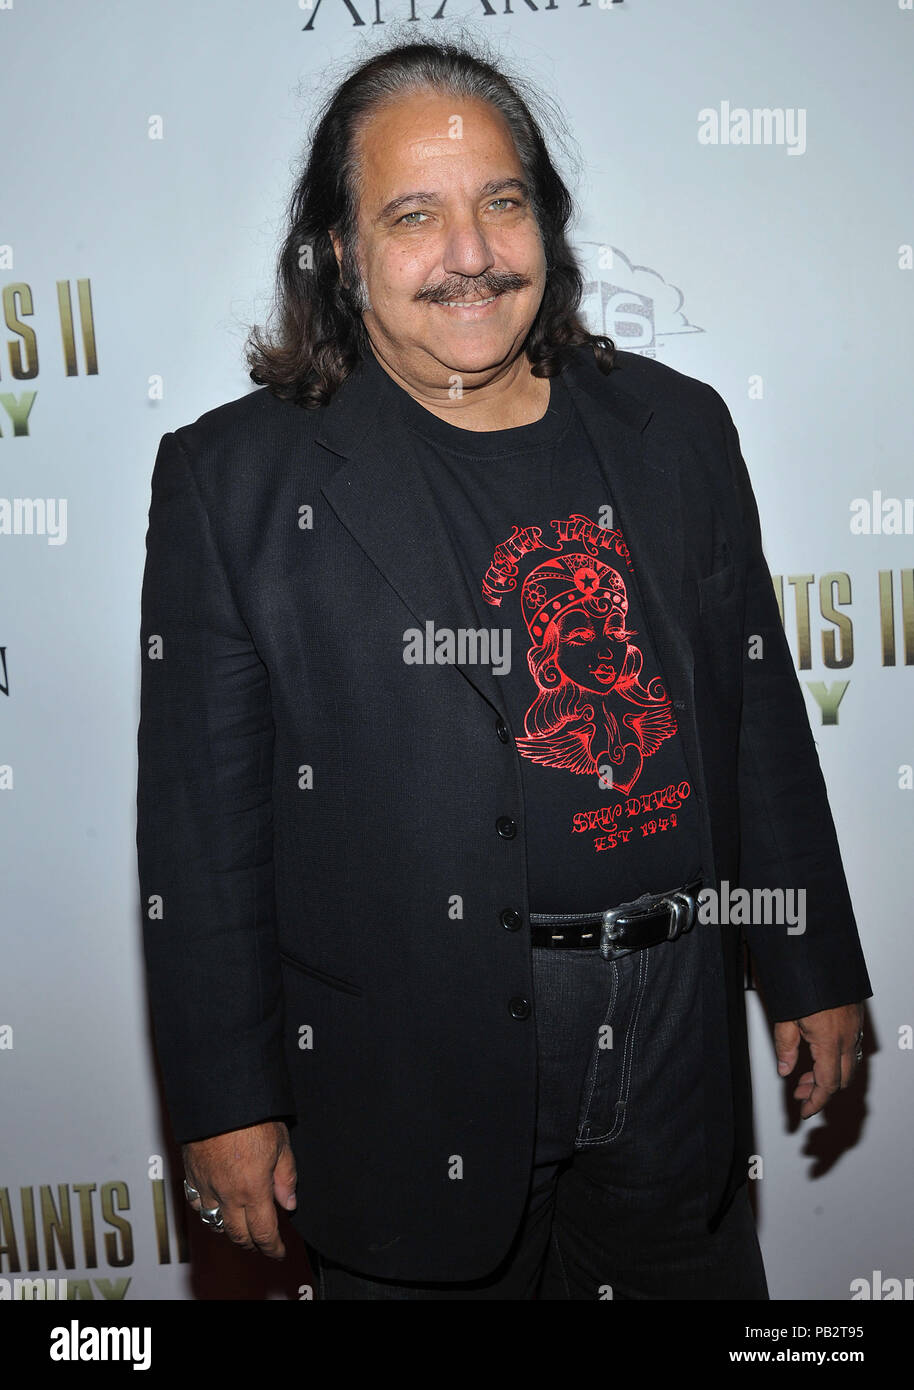 Ron Jeremy  - The Boondock Saints II  Premiere at the Arclight Theatre In Los Angeles.JeremyRon 45 Red Carpet Event, Vertical, USA, Film Industry, Celebrities,  Photography, Bestof, Arts Culture and Entertainment, Topix Celebrities fashion /  Vertical, Best of, Event in Hollywood Life - California,  Red Carpet and backstage, USA, Film Industry, Celebrities,  movie celebrities, TV celebrities, Music celebrities, Photography, Bestof, Arts Culture and Entertainment,  Topix, vertical, one person,, from the years , 2006 to 2009, inquiry tsuni@Gamma-USA.com - Three Quarters Stock Photo